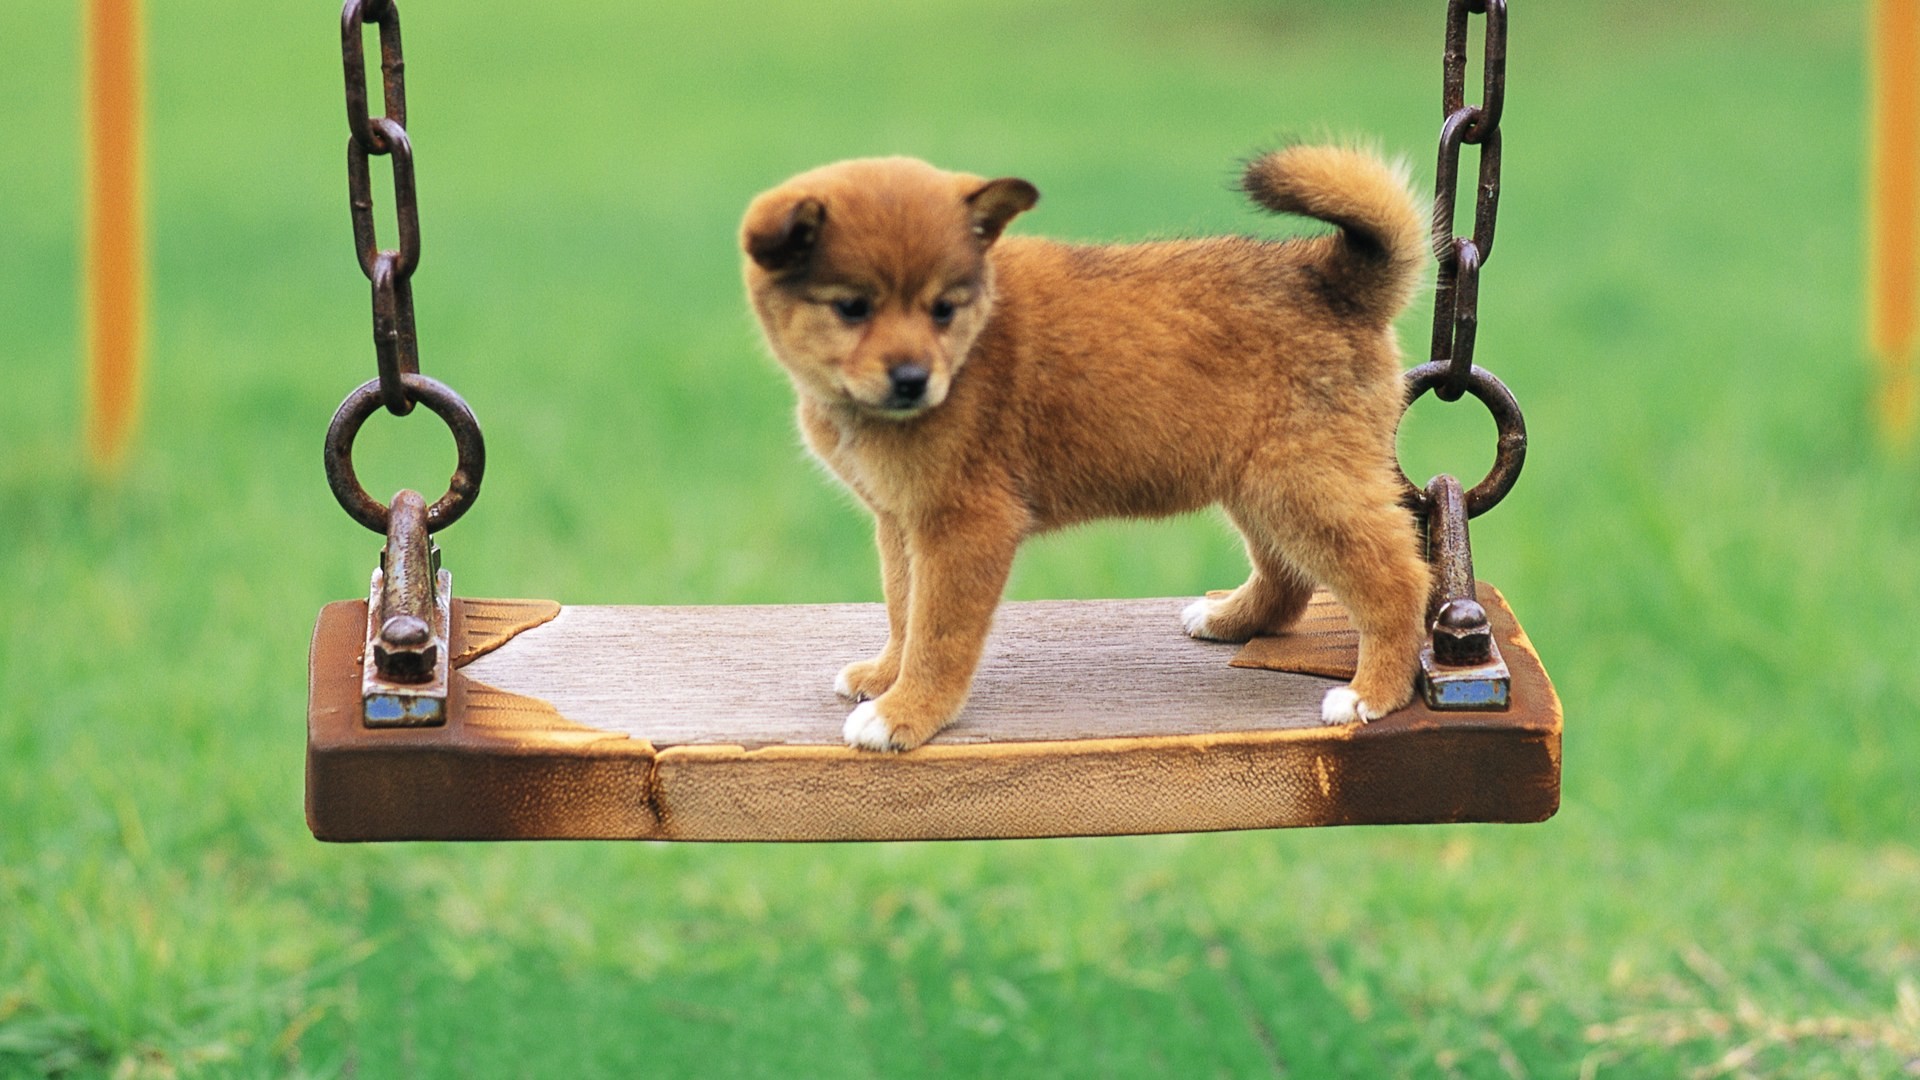 1920x1080 Cute puppy in a park Dog wallpaper Archives